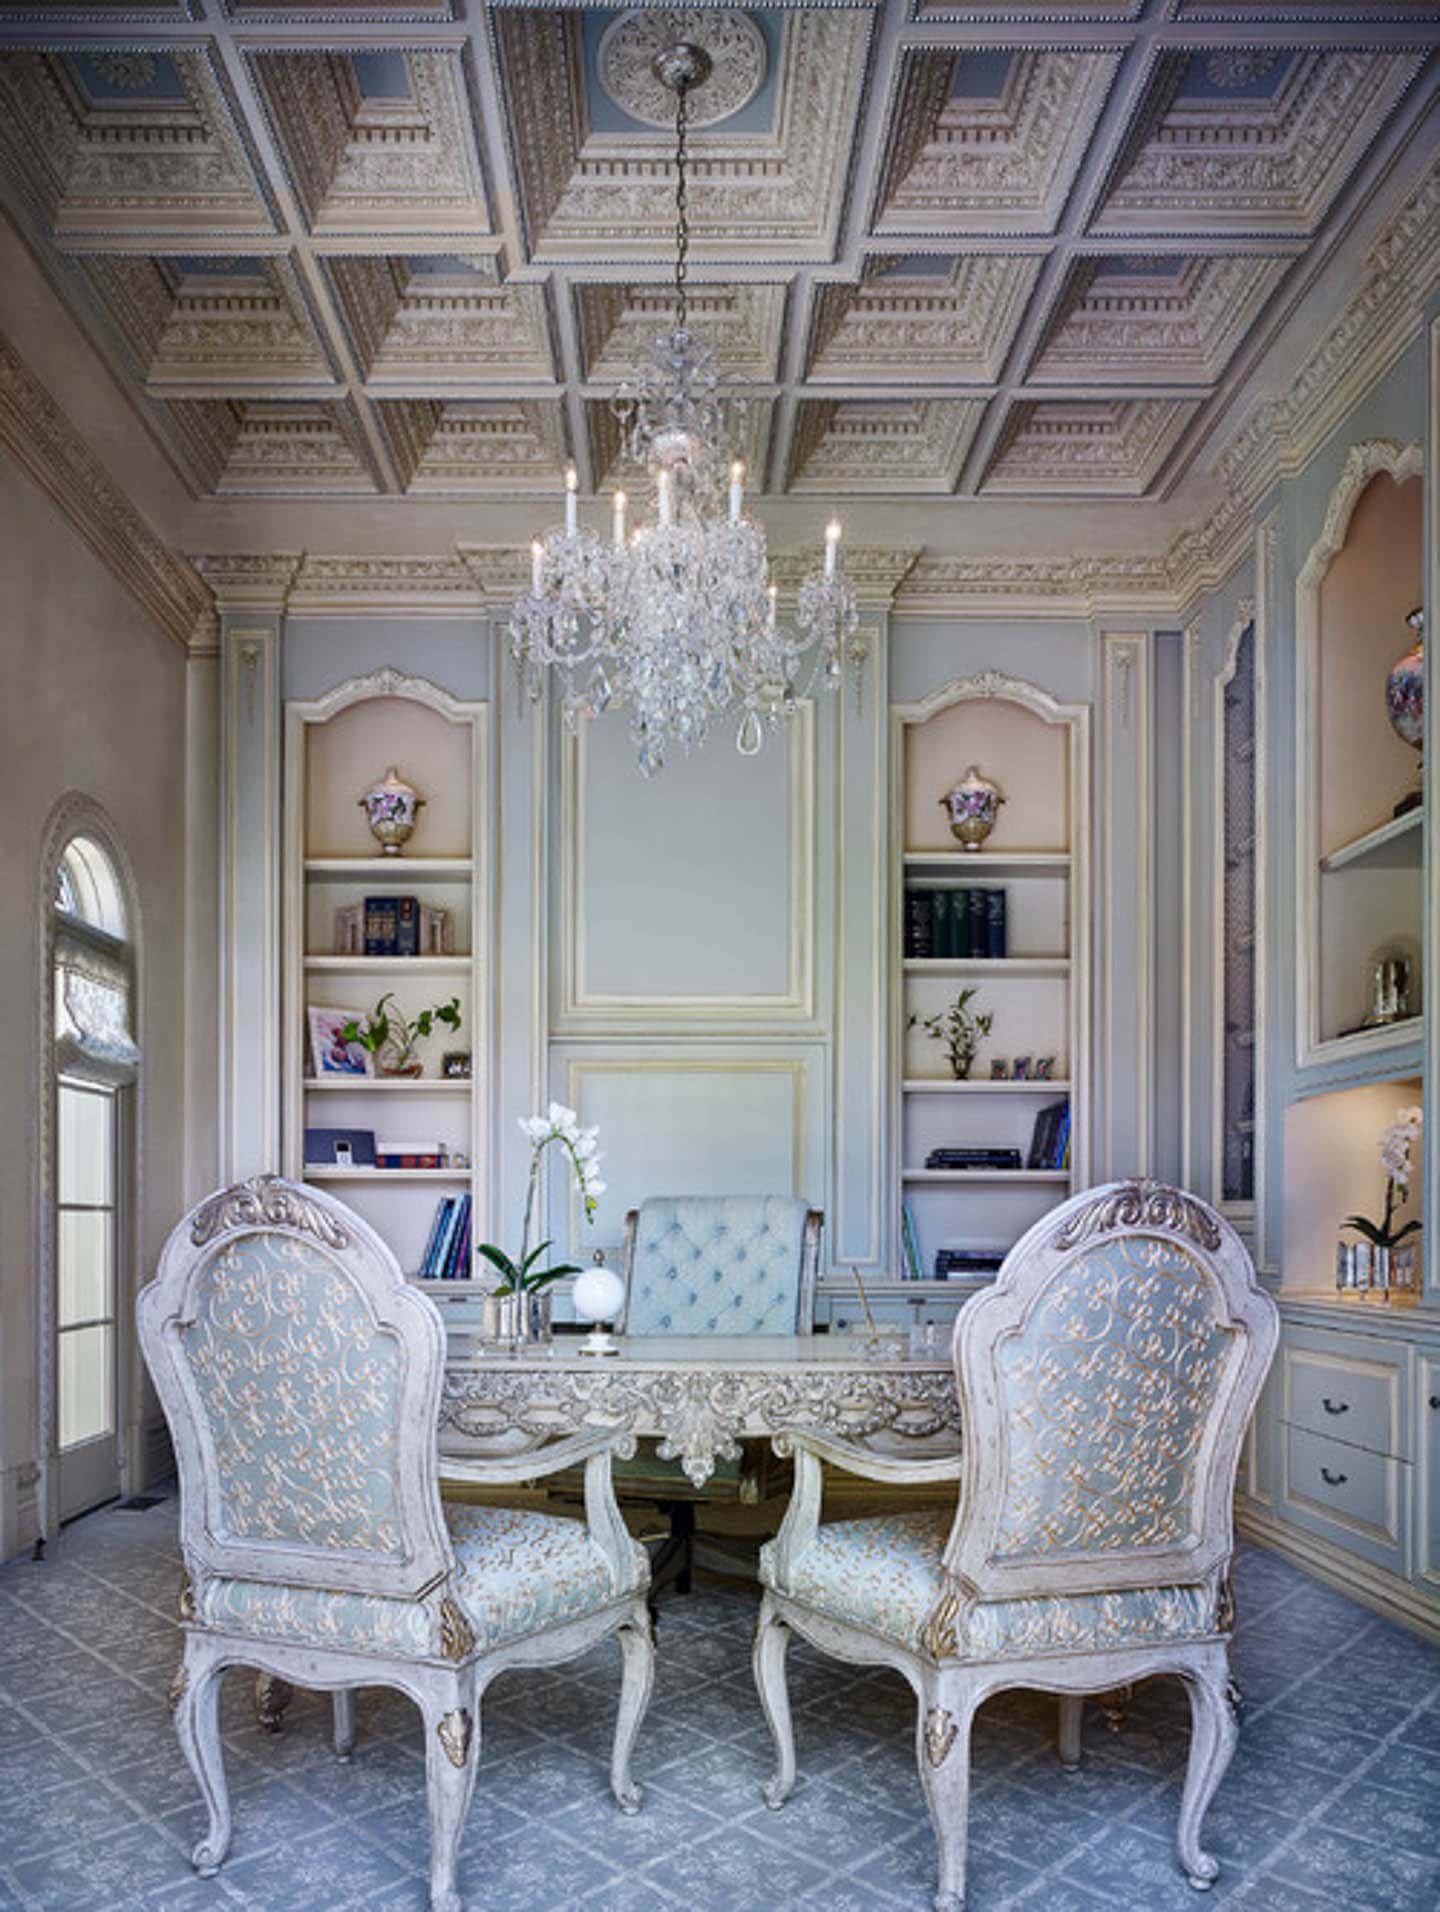 Traditional home office painted light blue with panel moldings painted gold, a coffered ceiling, chandelier and traditional chairs upholstered in light blue